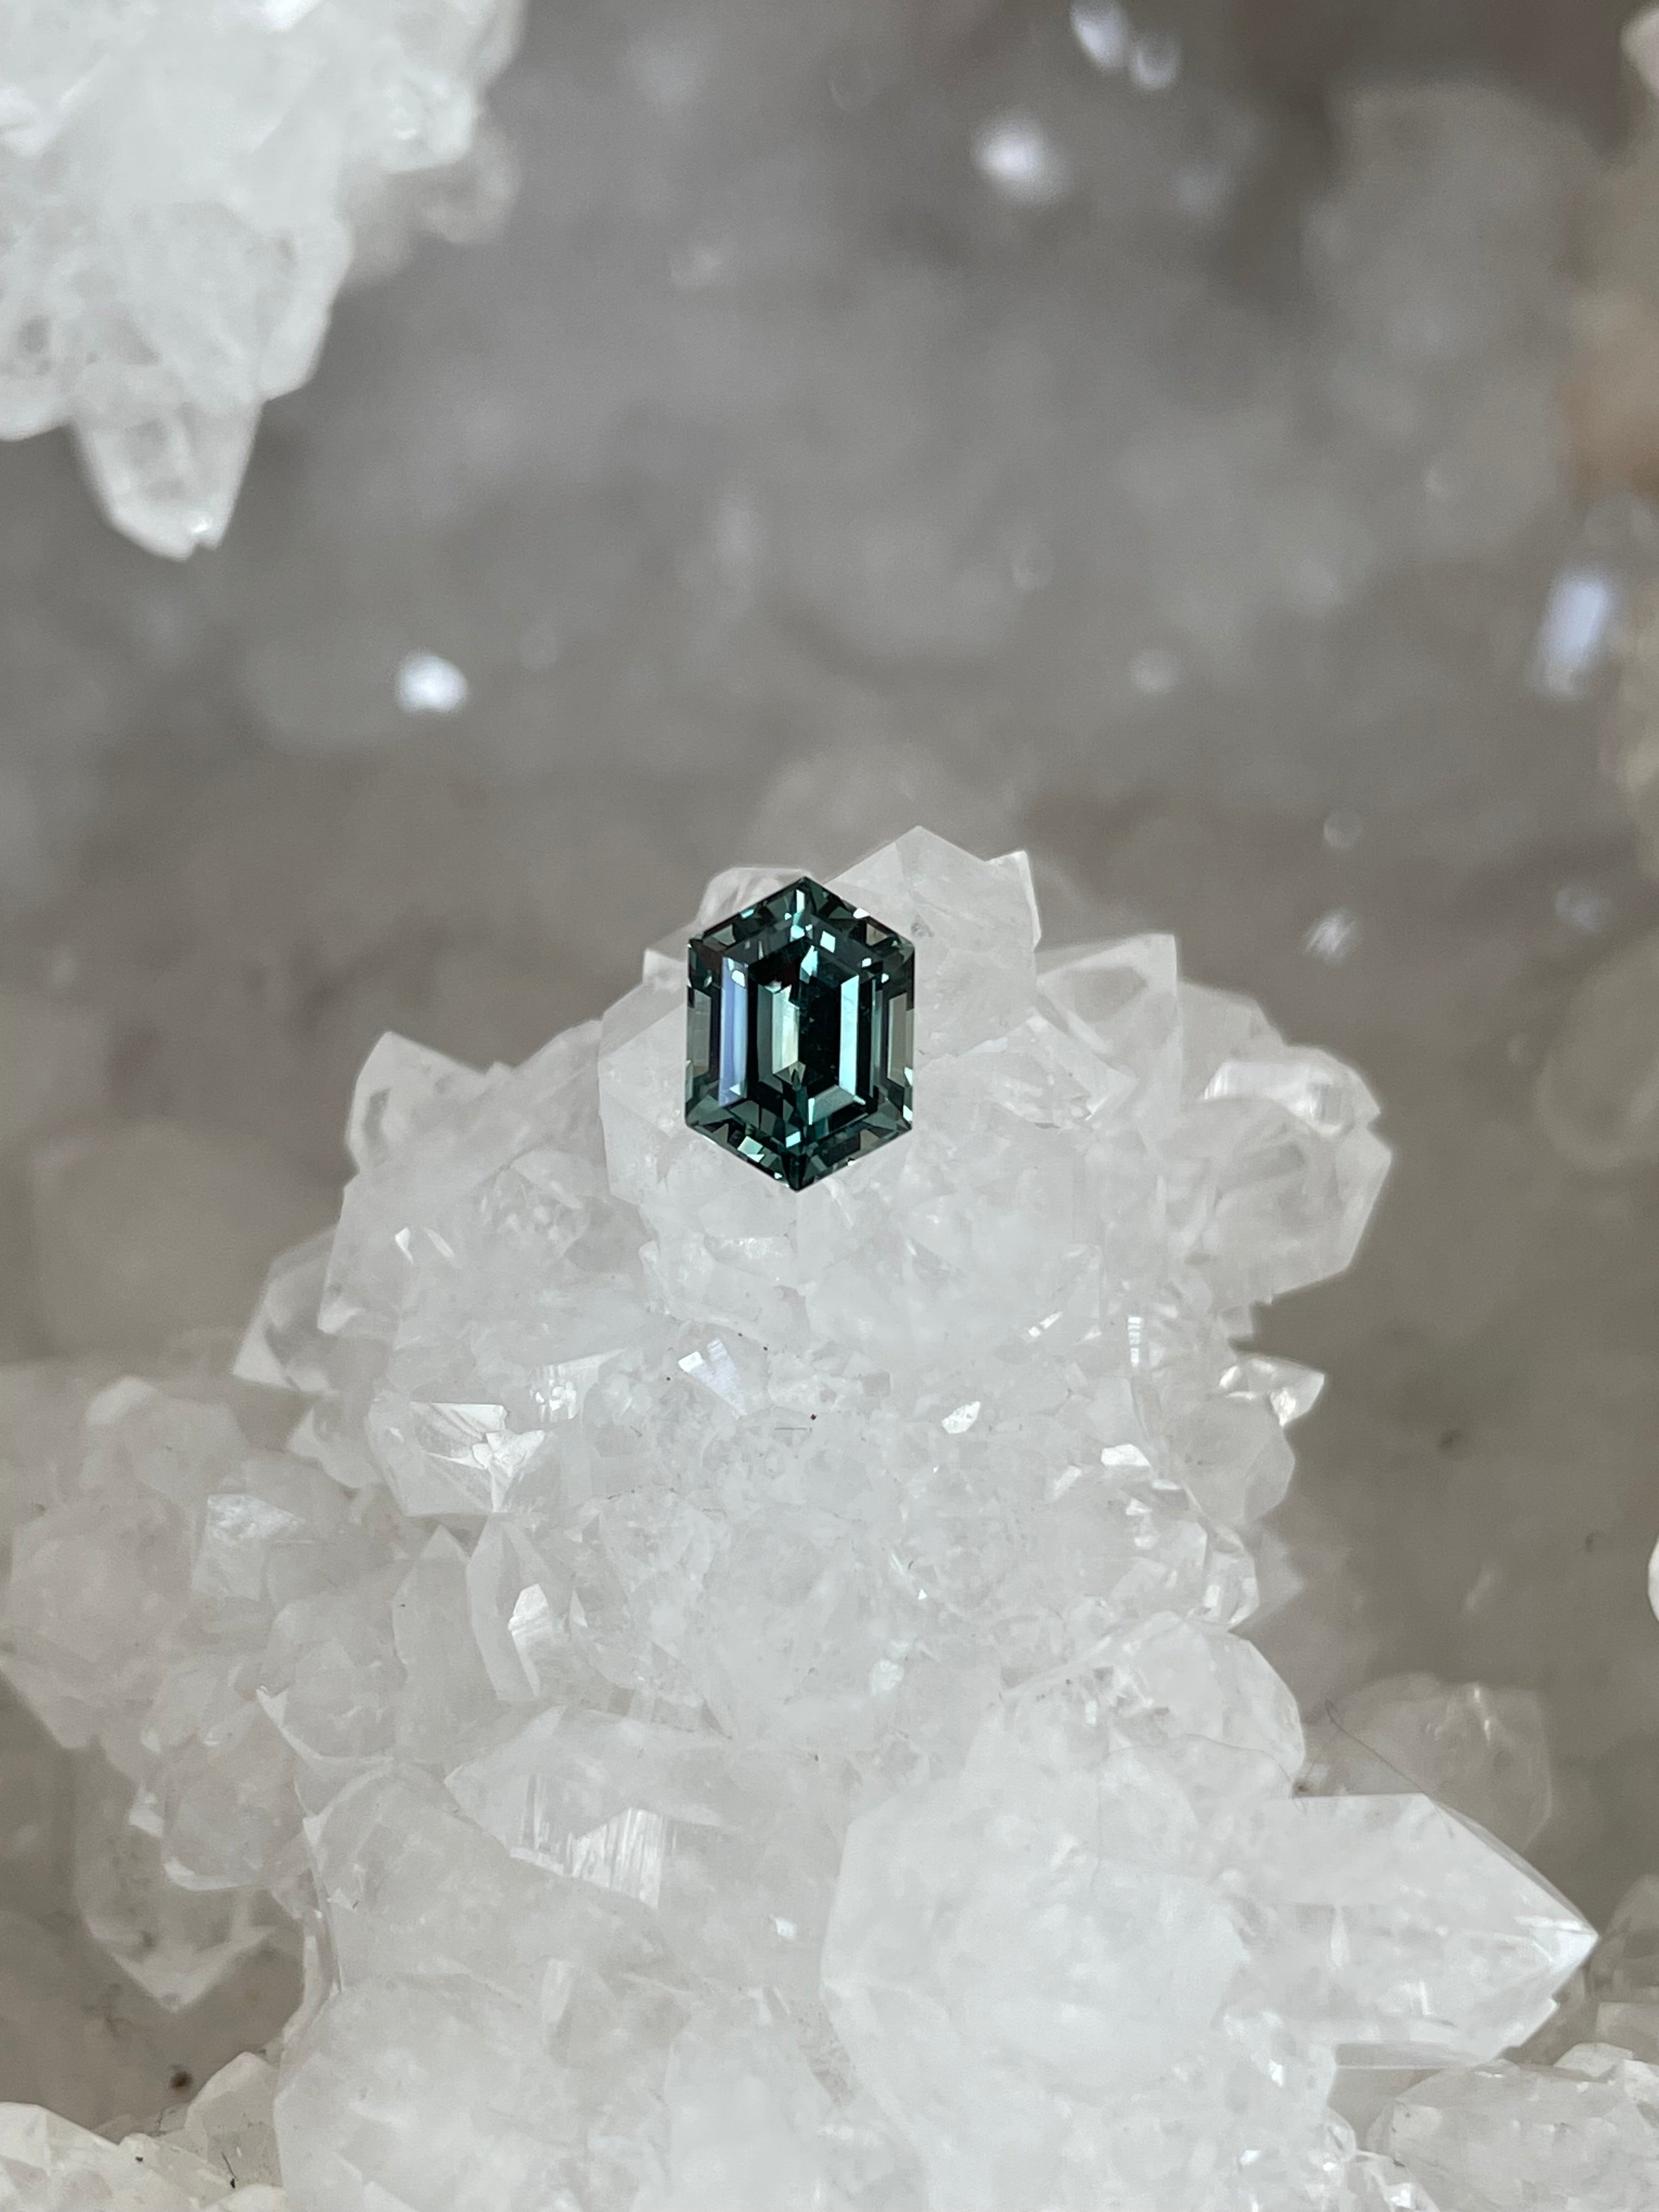 Montana Sapphire 1.42 CT Light Teal to Grass or Sage Green Stretched Hexagon